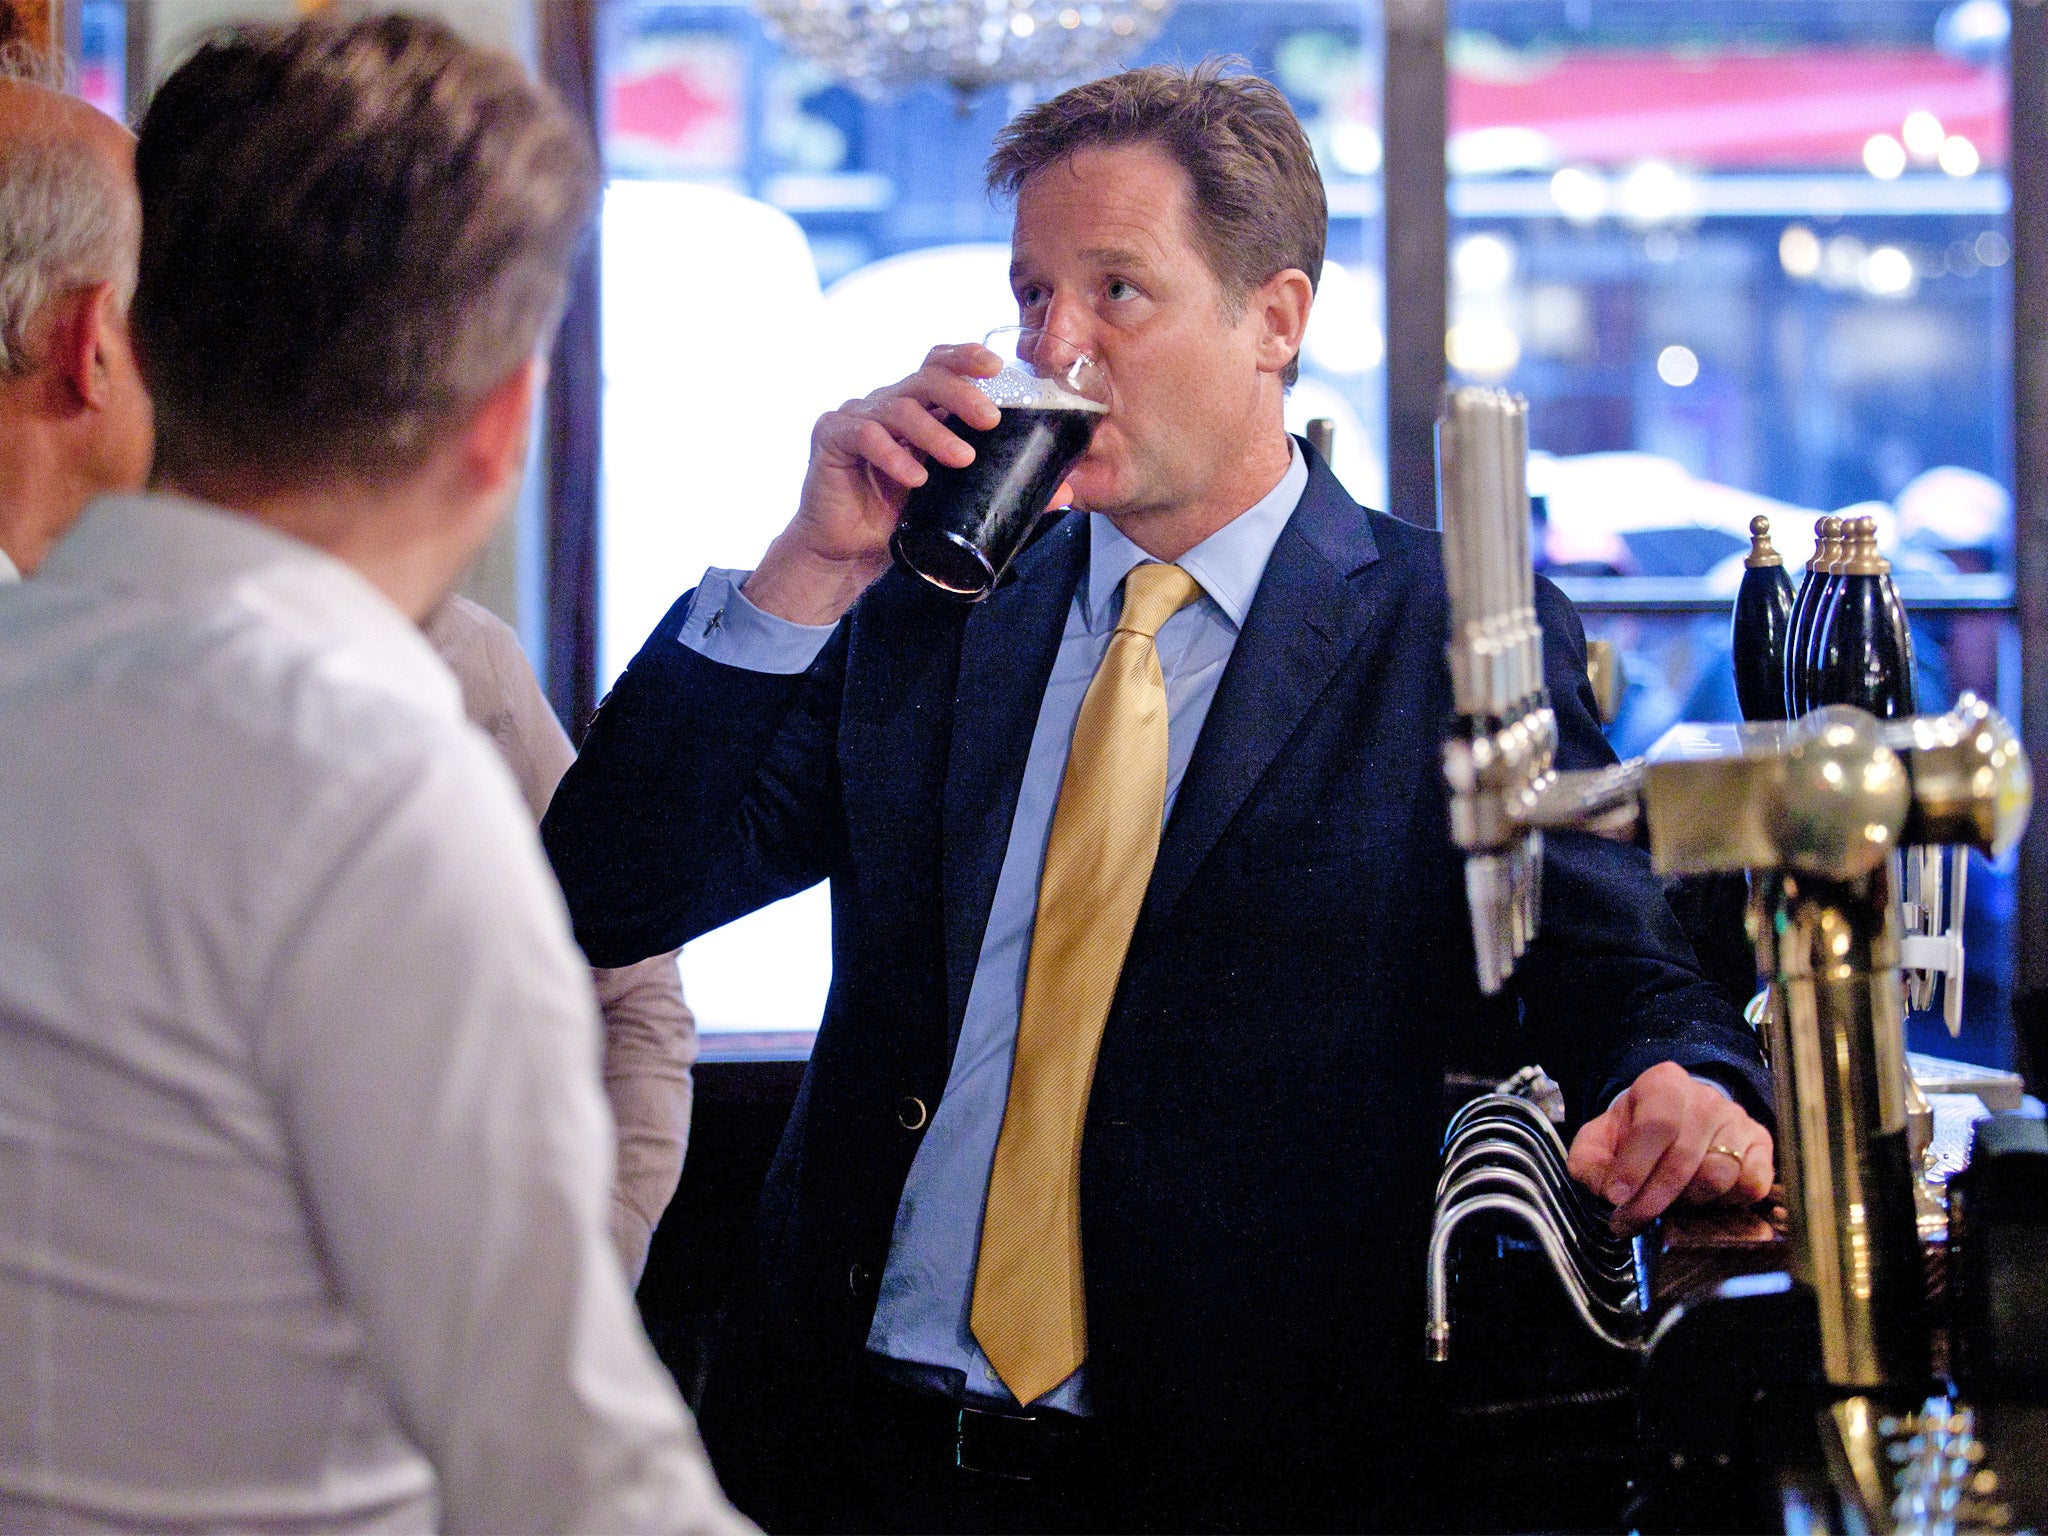 Deputy Prime Minster Nick Clegg sips his pint at the Queens Head Pub in Soho, central London